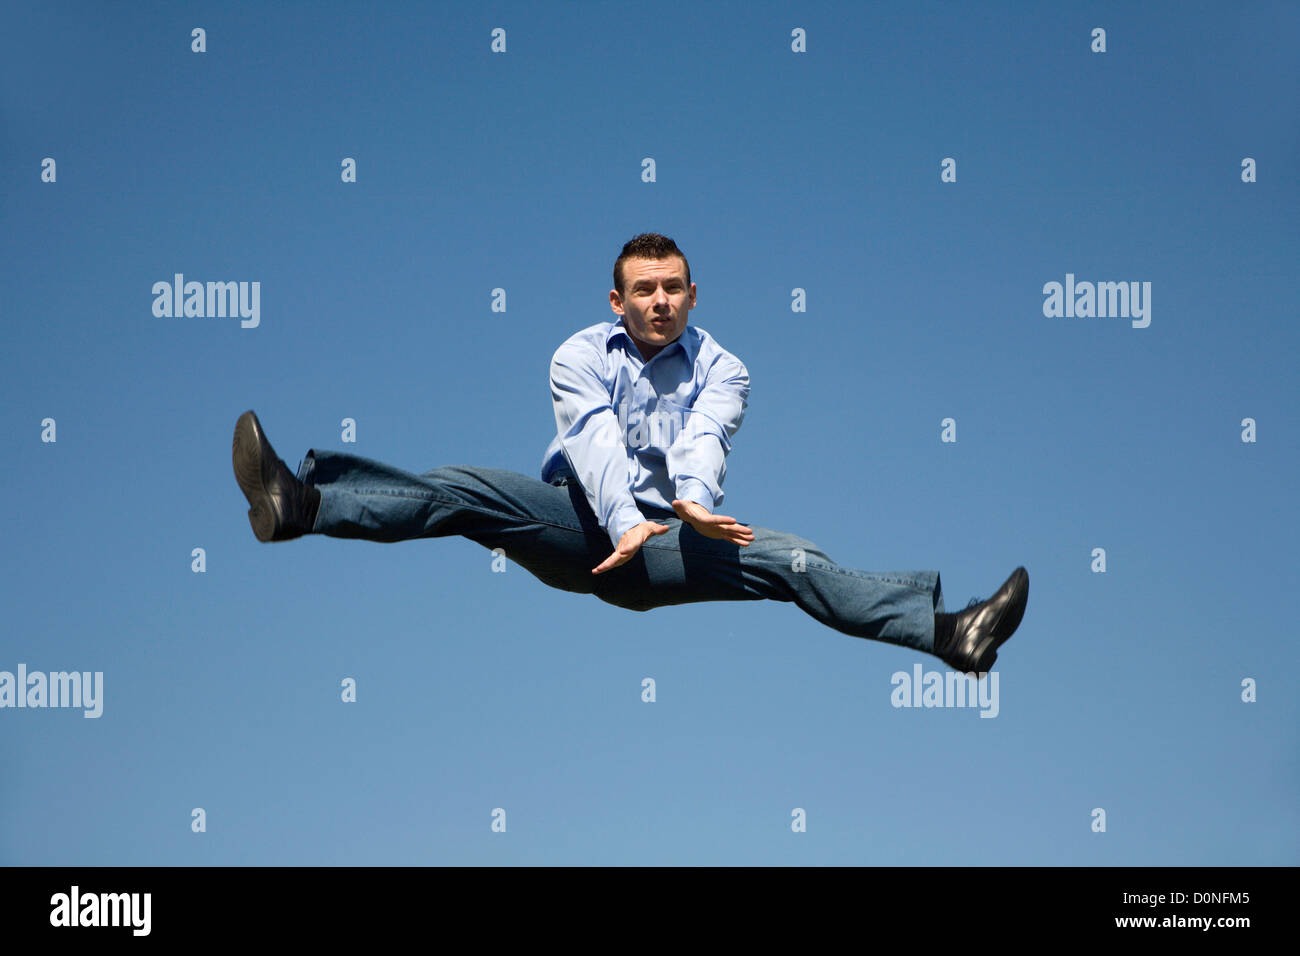 jump of young man Stock Photo